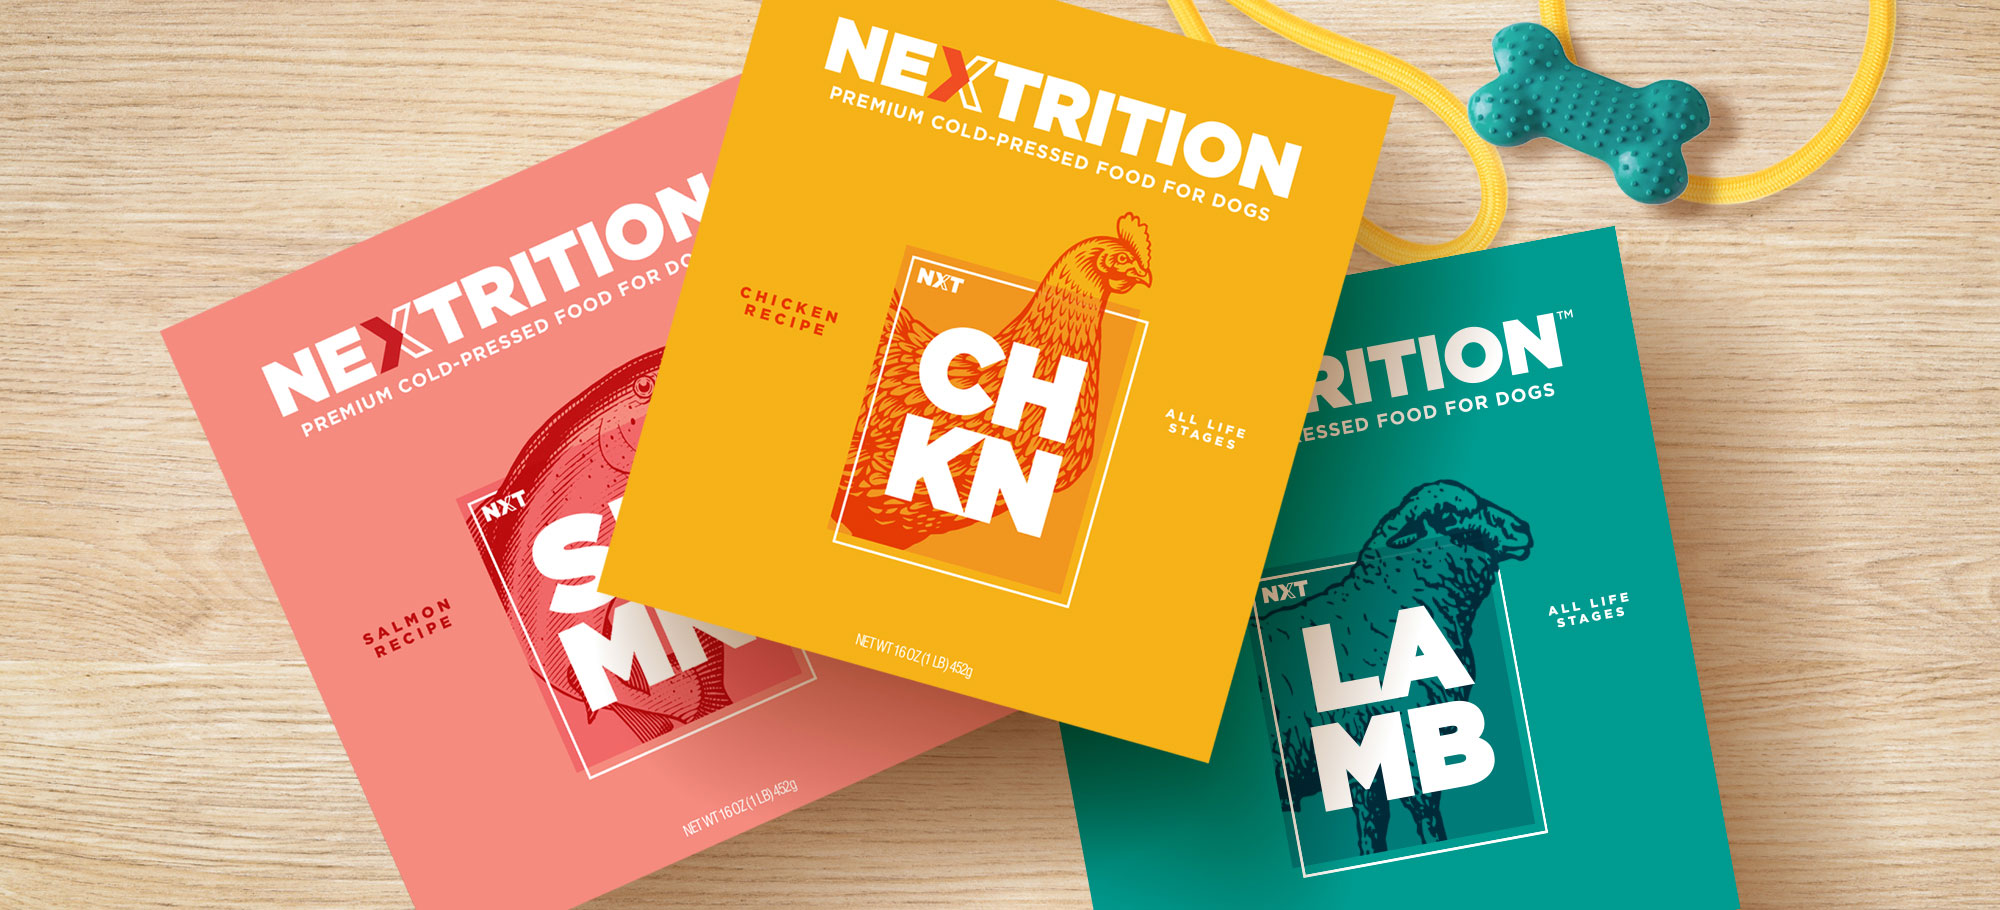 Nextrition Pet Food Package Design Agency